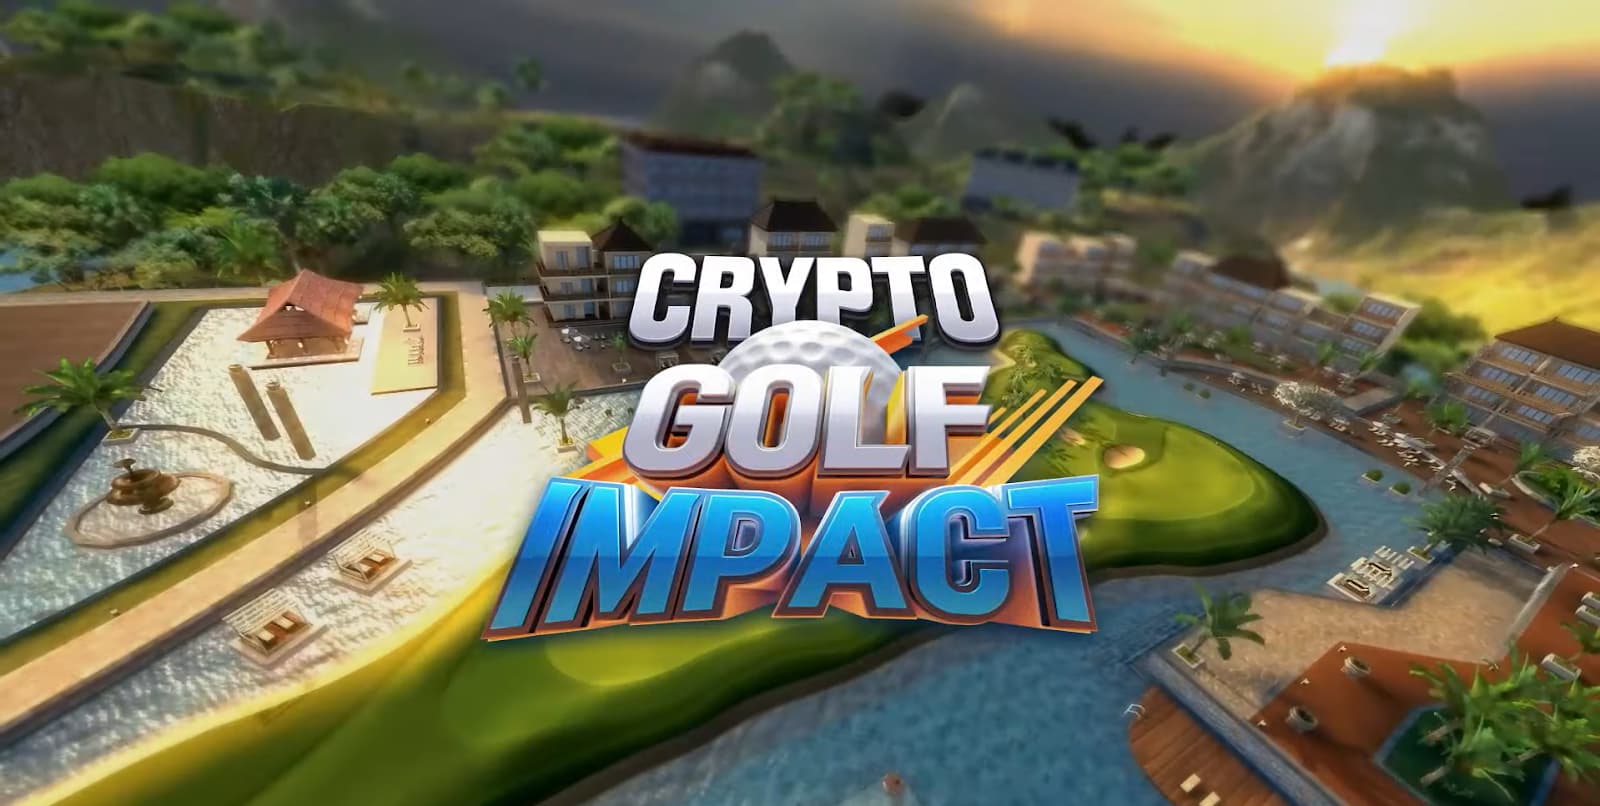 A vibrant logo of Crypto Golf Impact over a lush tropical resort setting